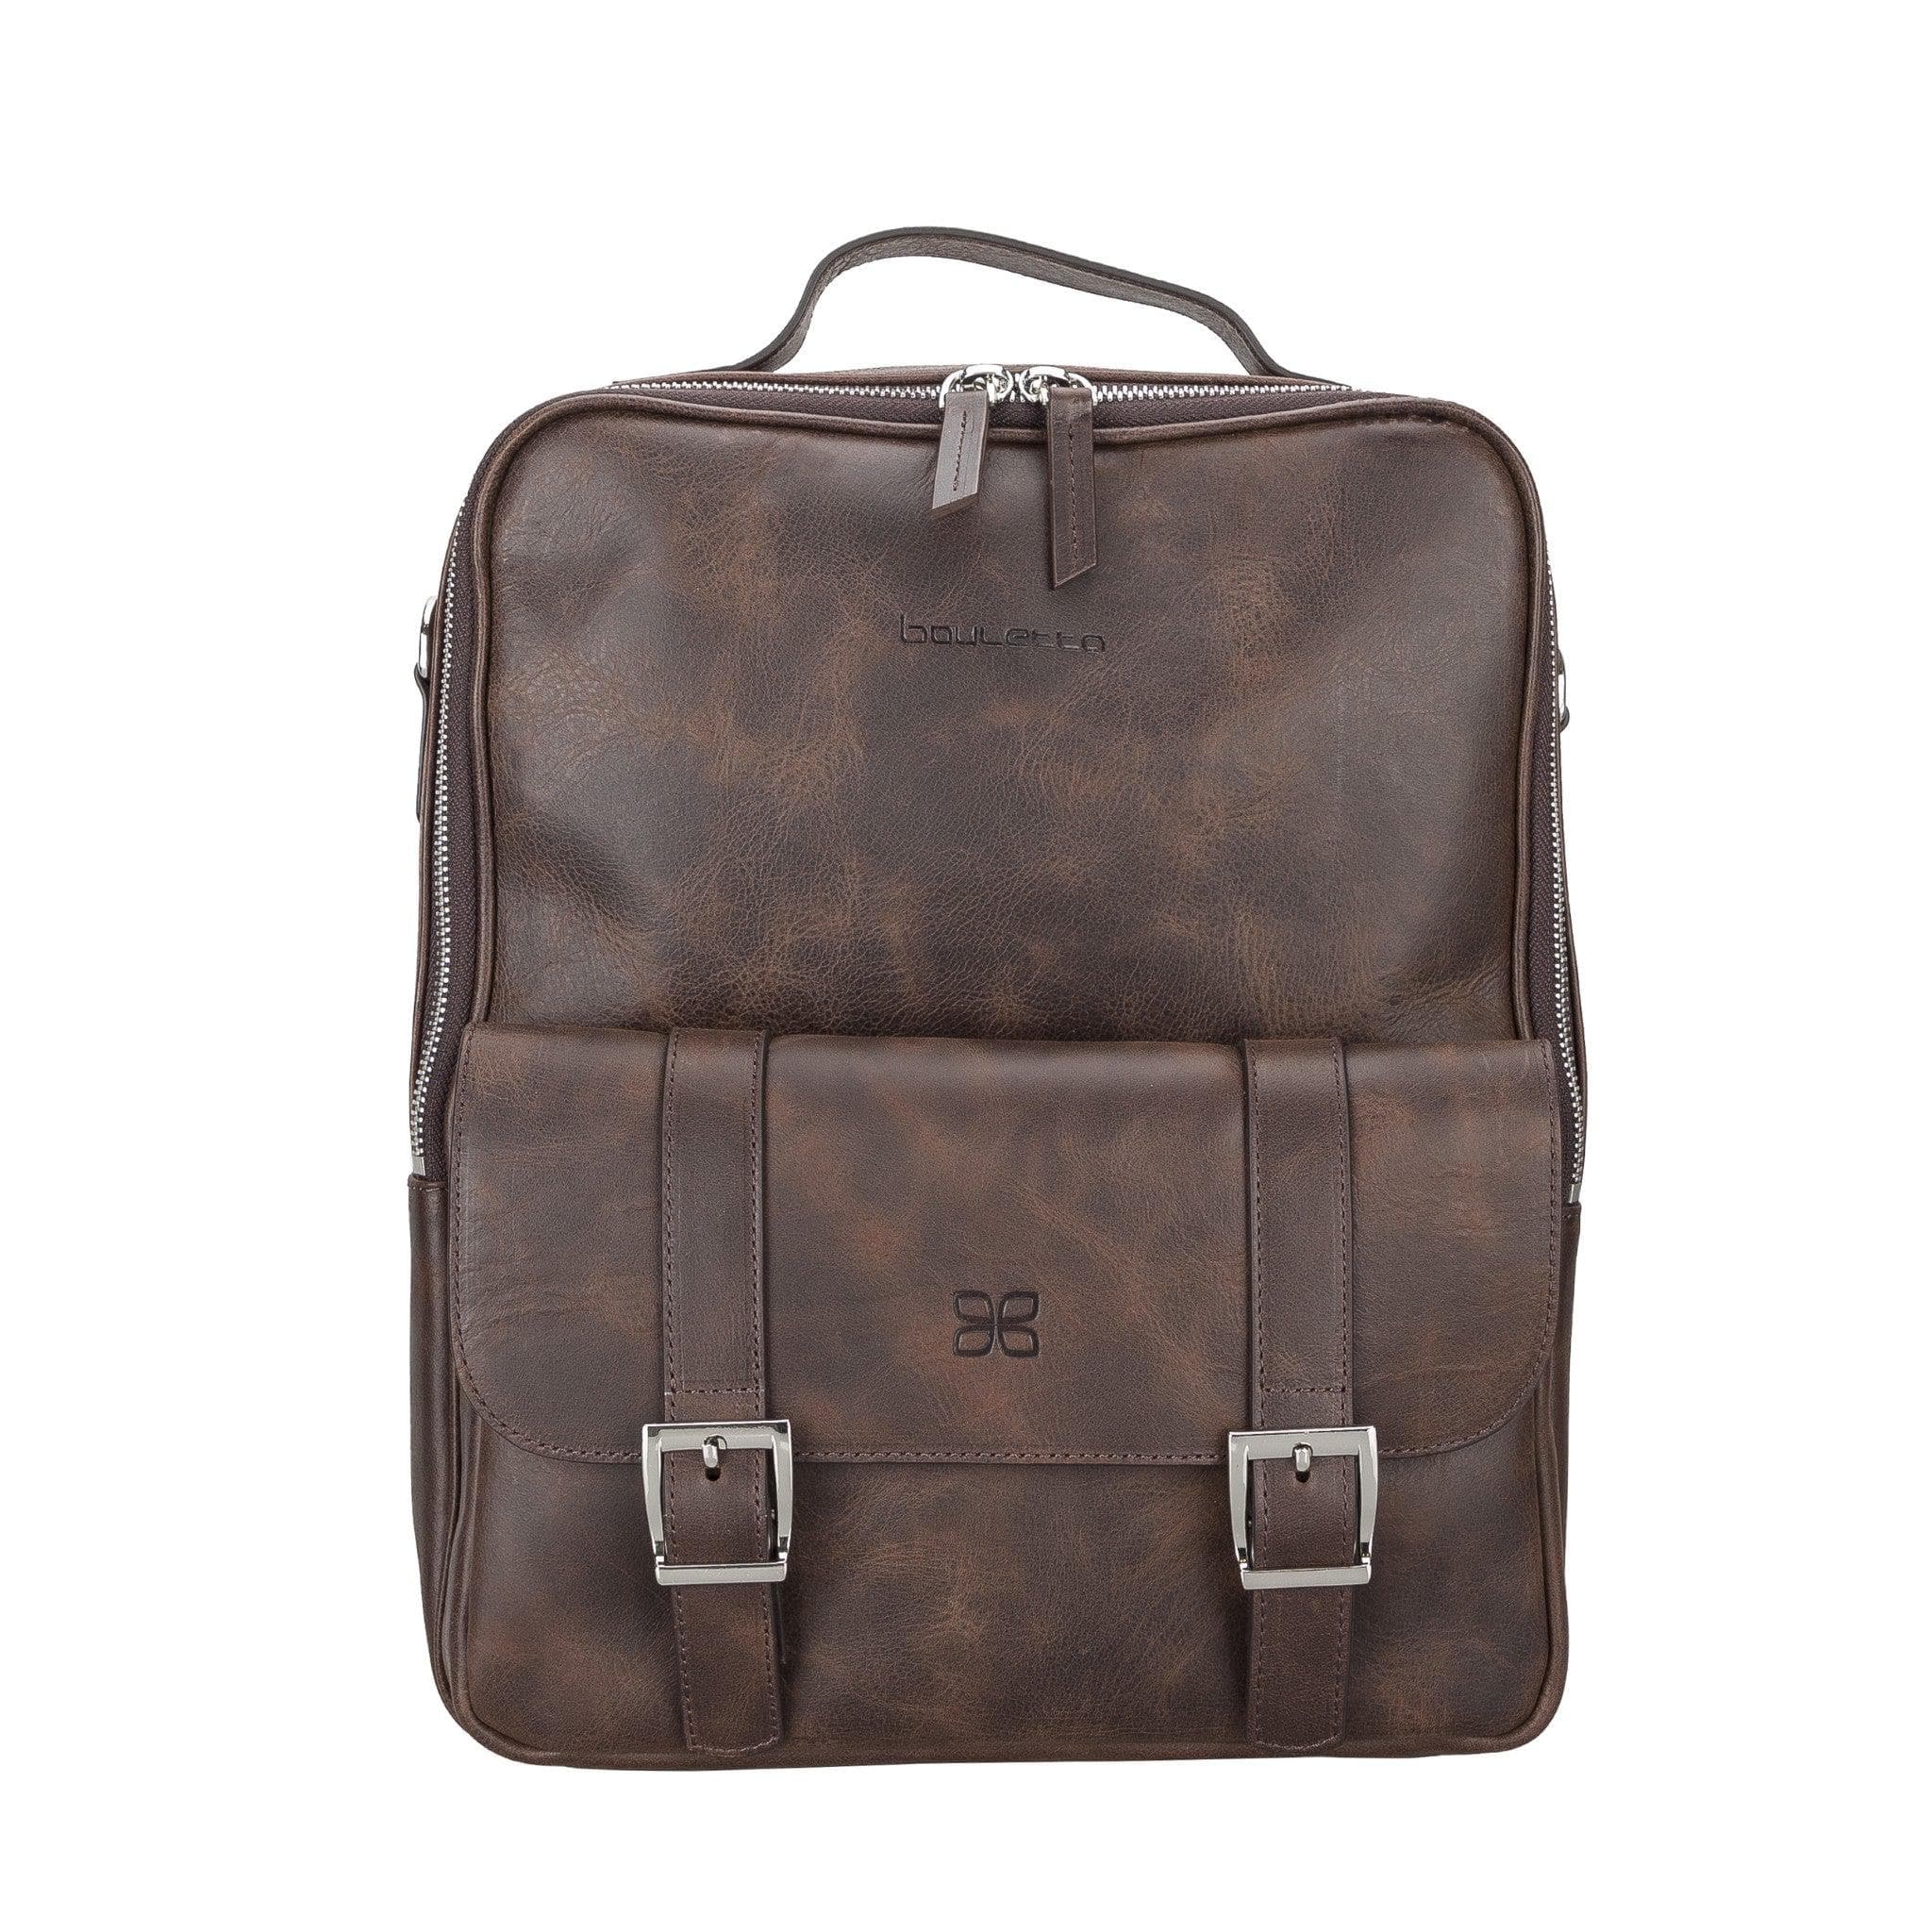 Molde Unisex Genuine Leather Backpack for Daily Life or Laptop / MacBook Bouletta LTD